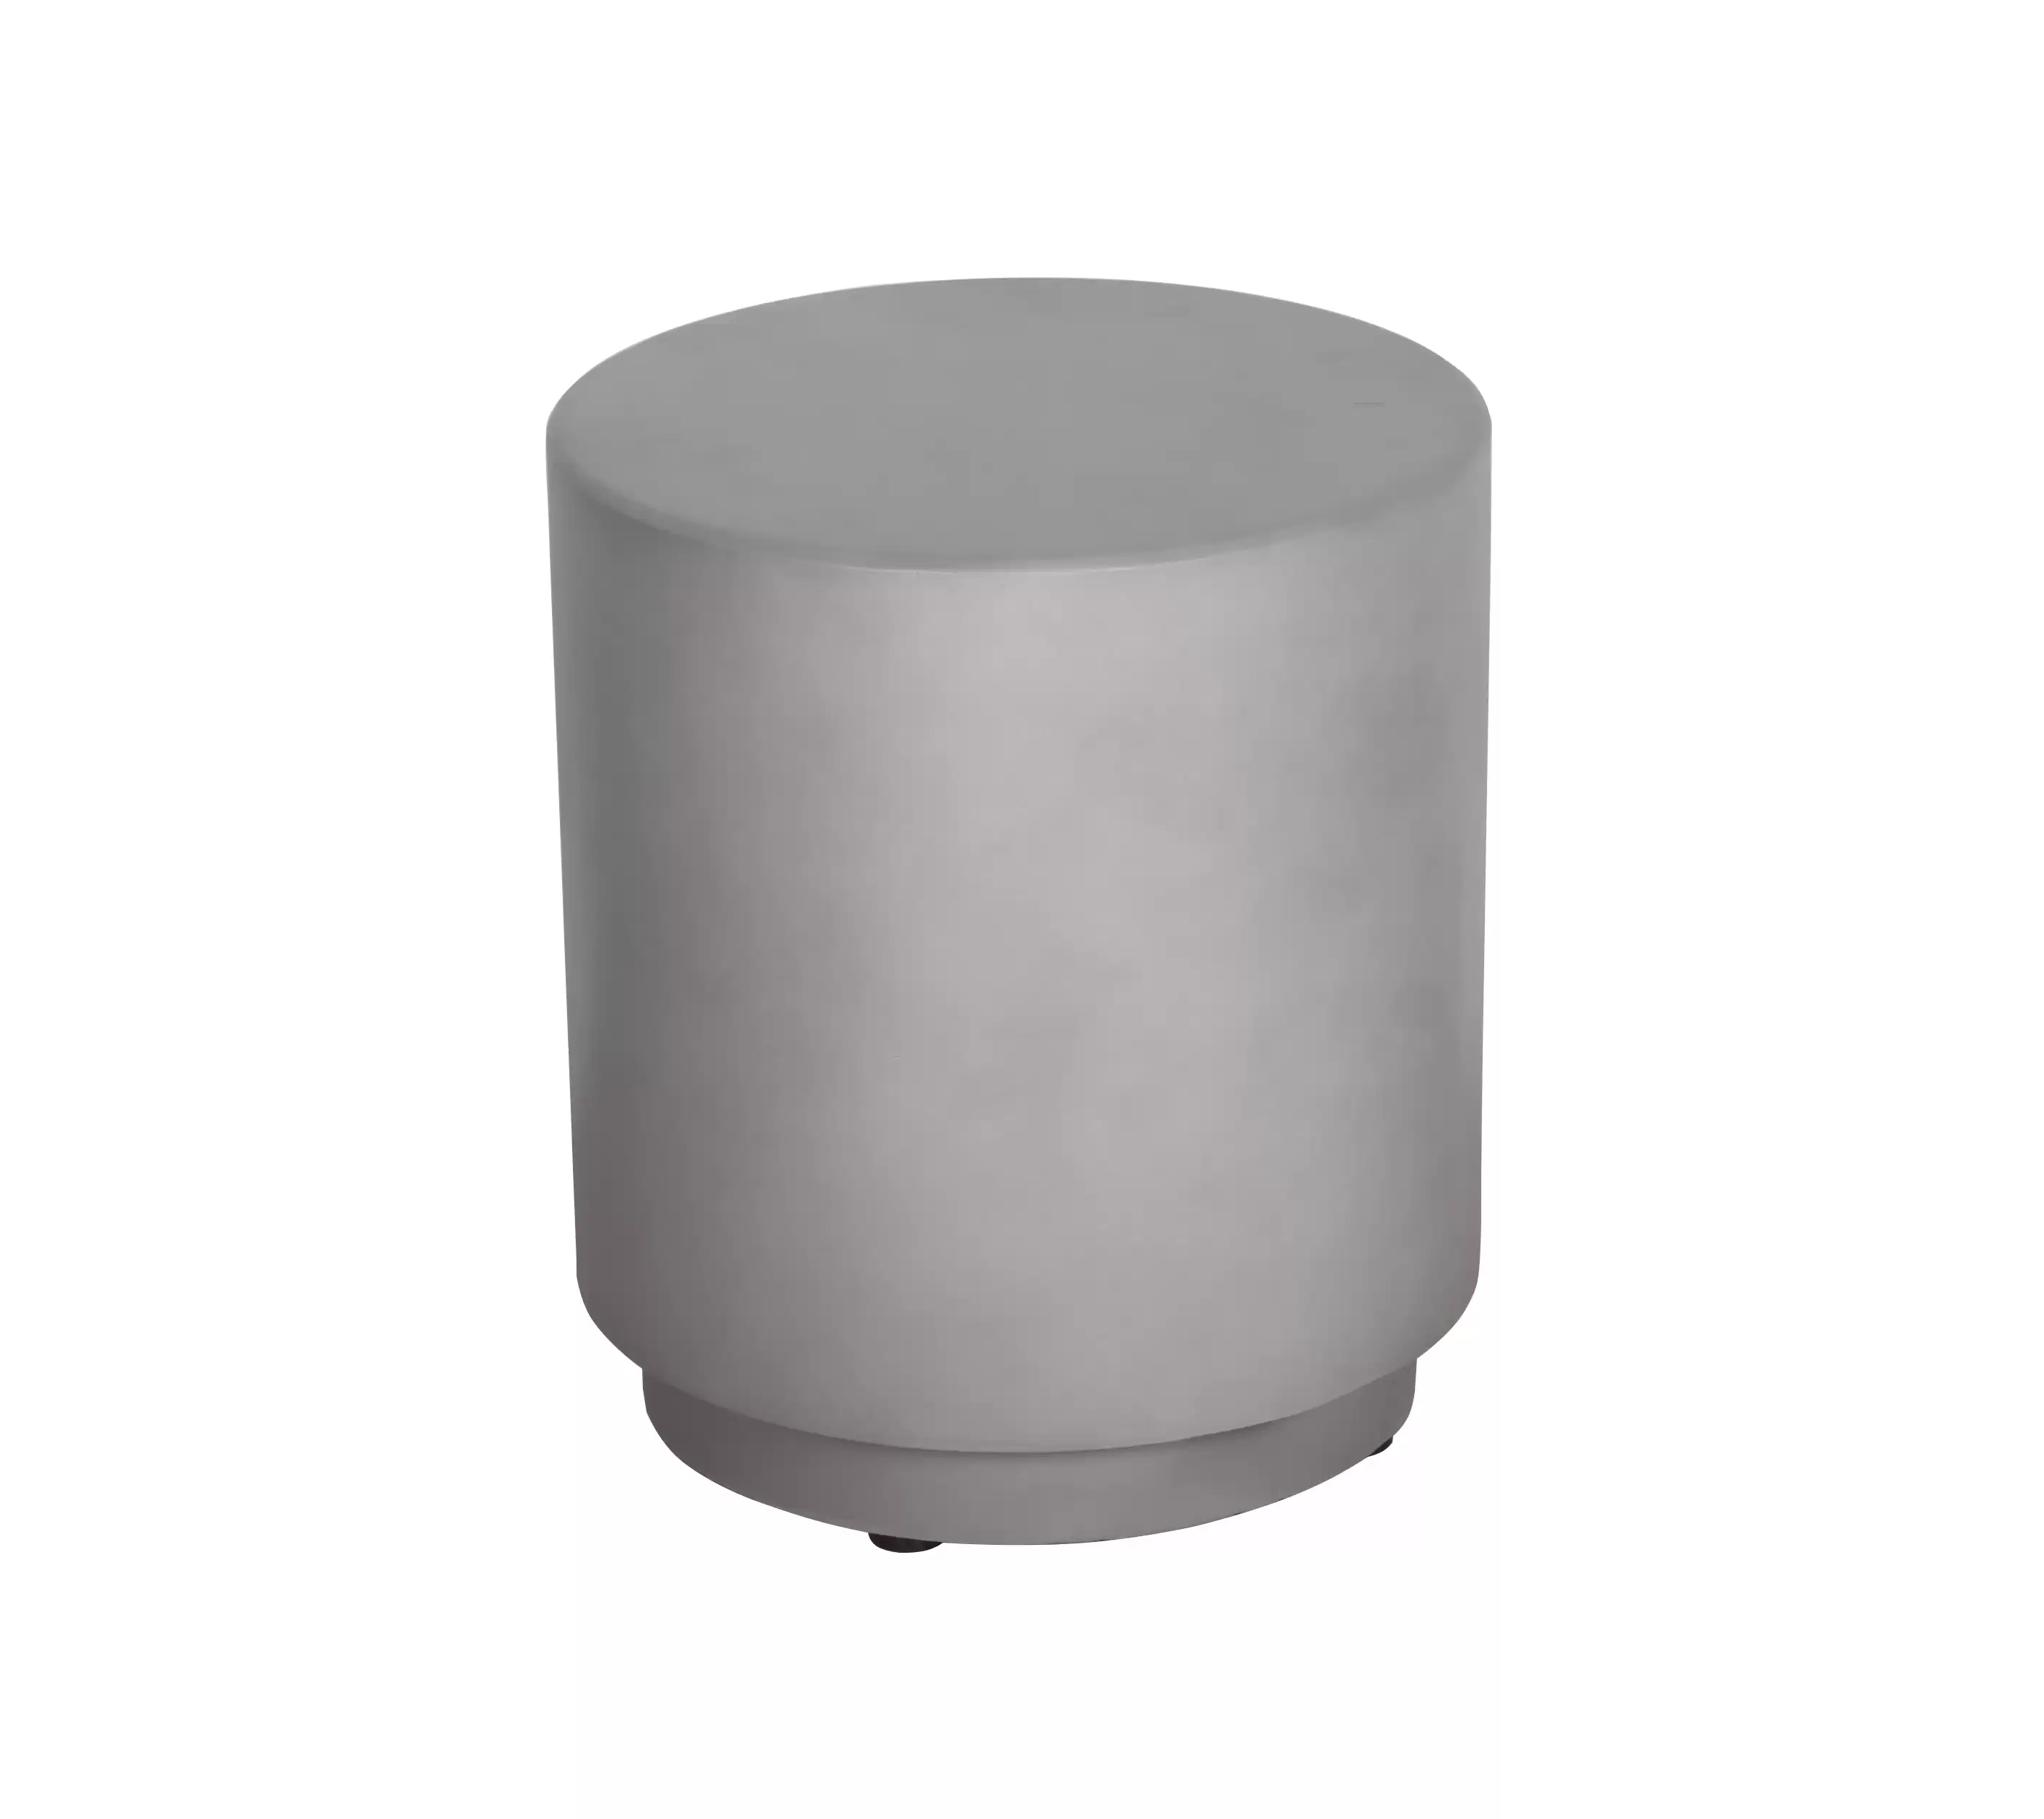 Faux Concrete Accent Table In Gray Color Round Shape